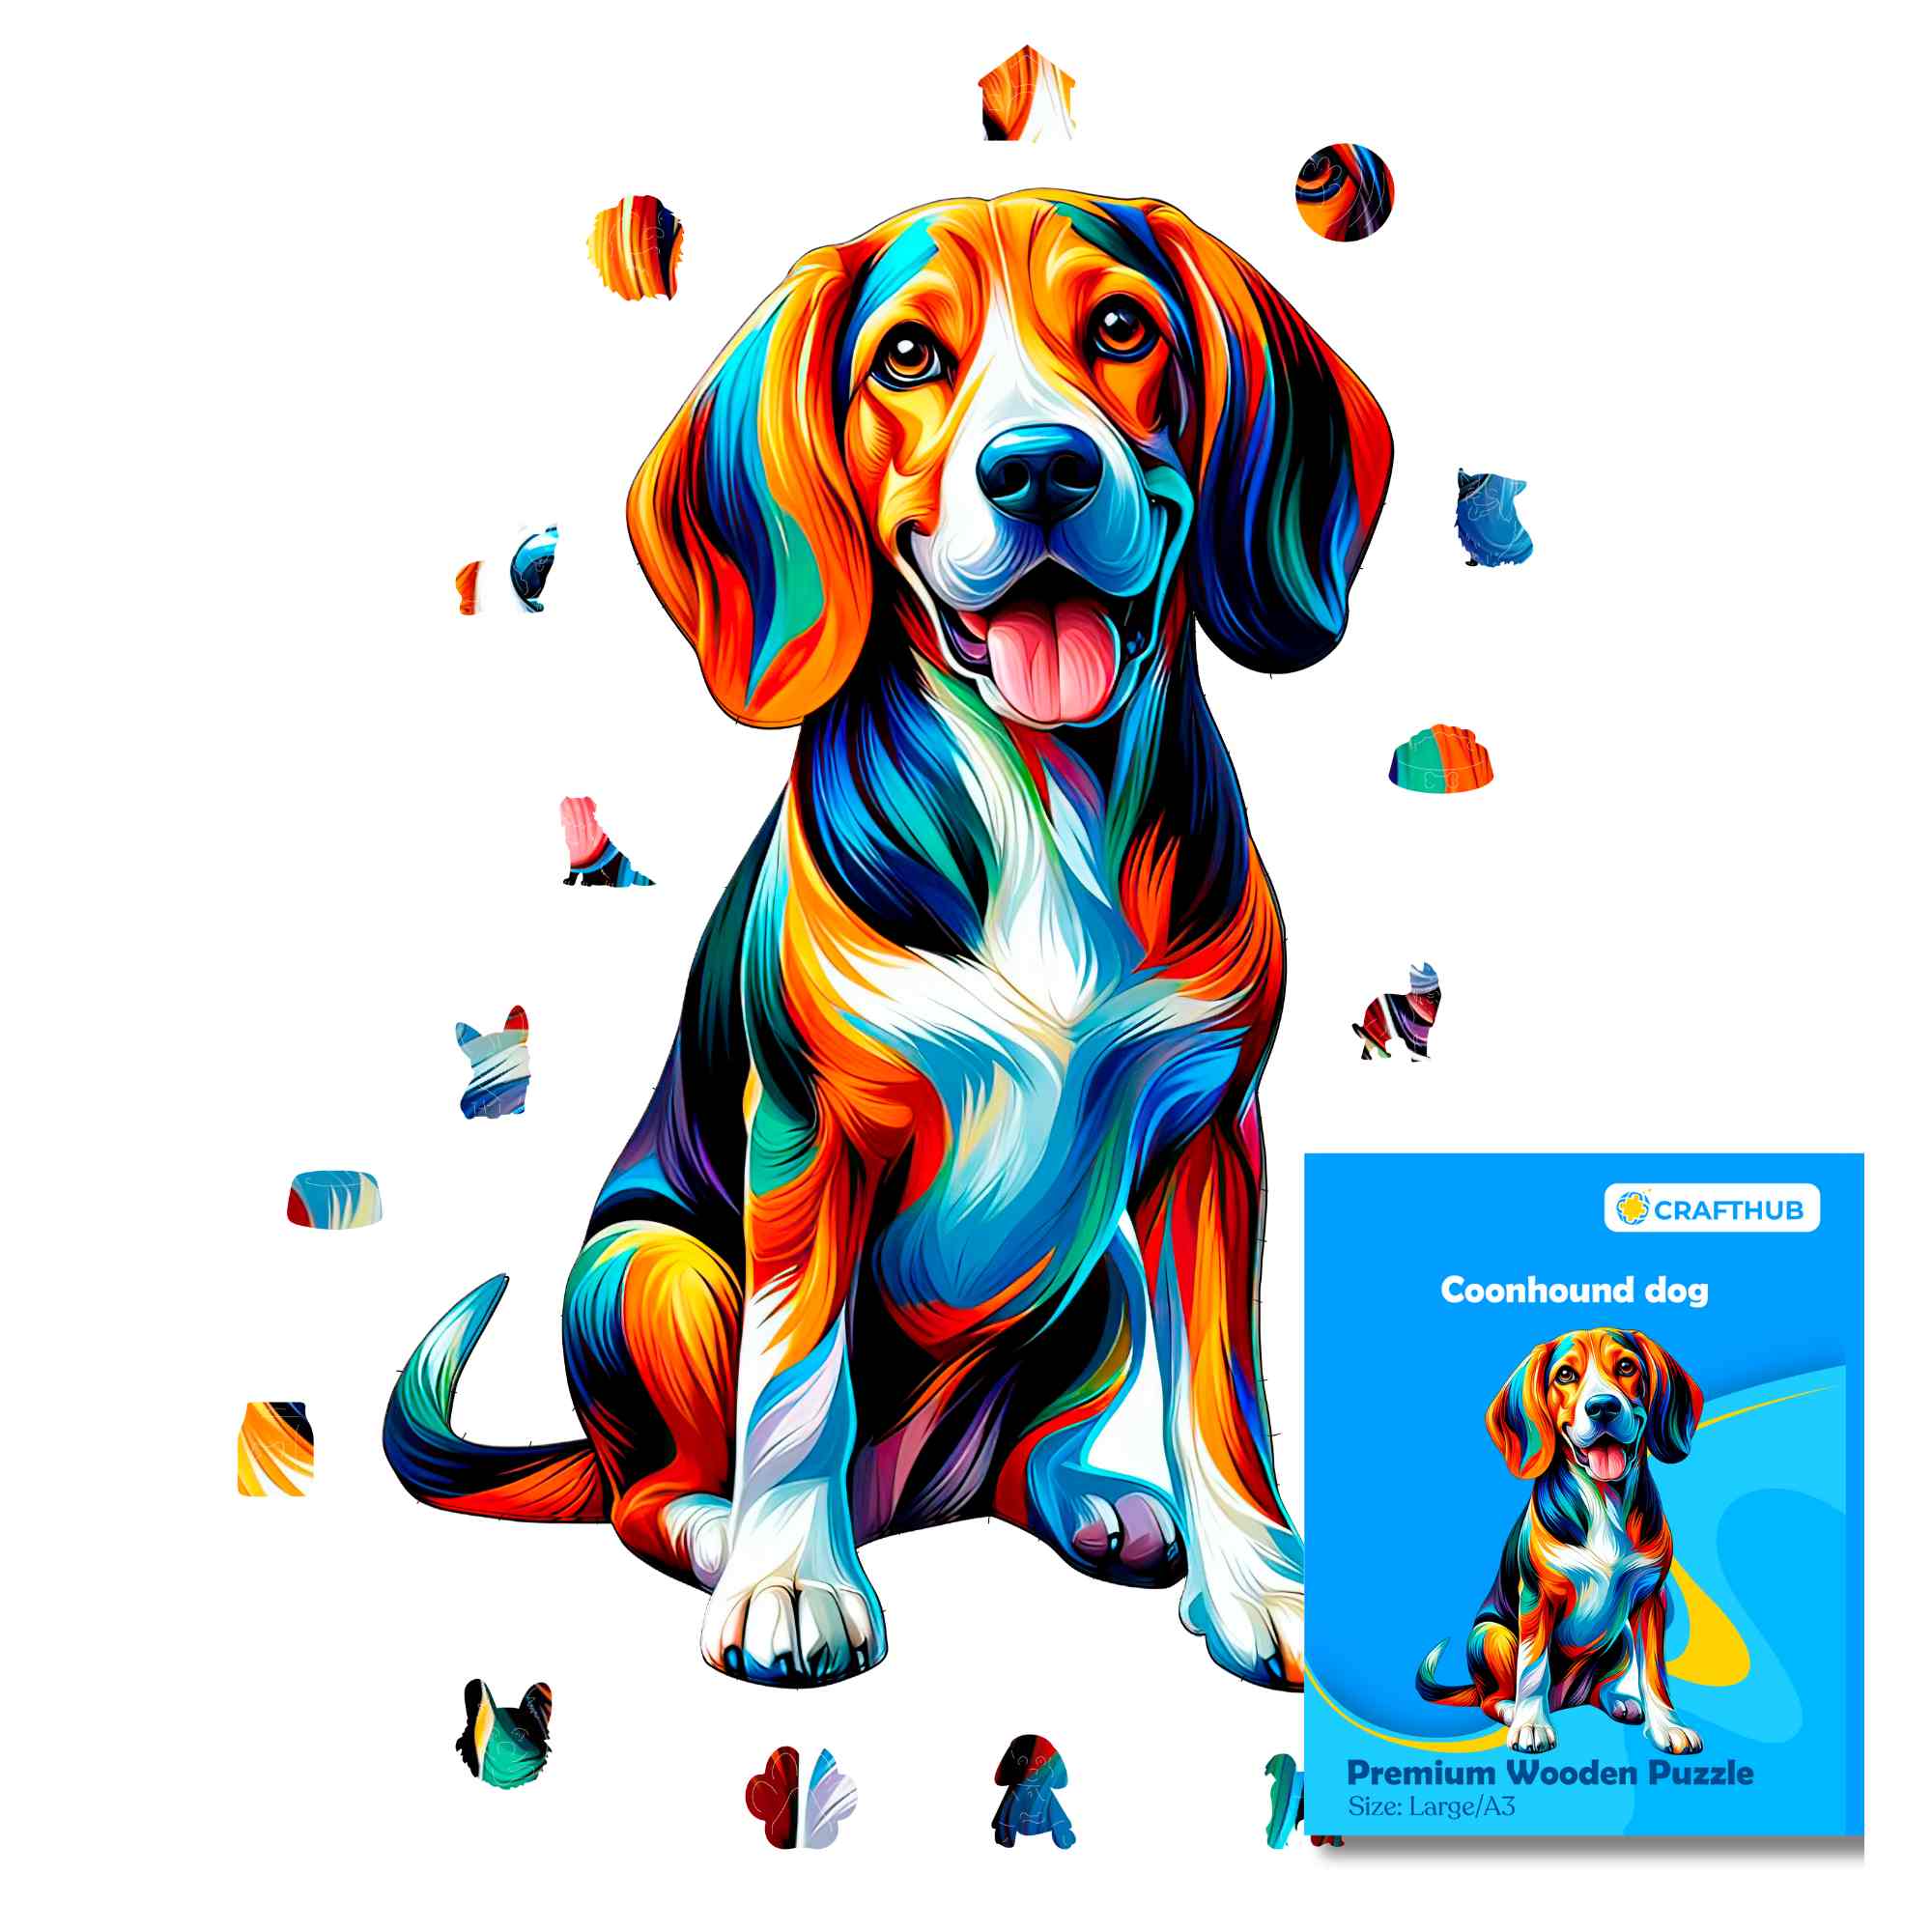 Animal Jigsaw Puzzle > Wooden Jigsaw Puzzle > Jigsaw Puzzle A4 Coonhound Dog - Jigsaw Puzzle